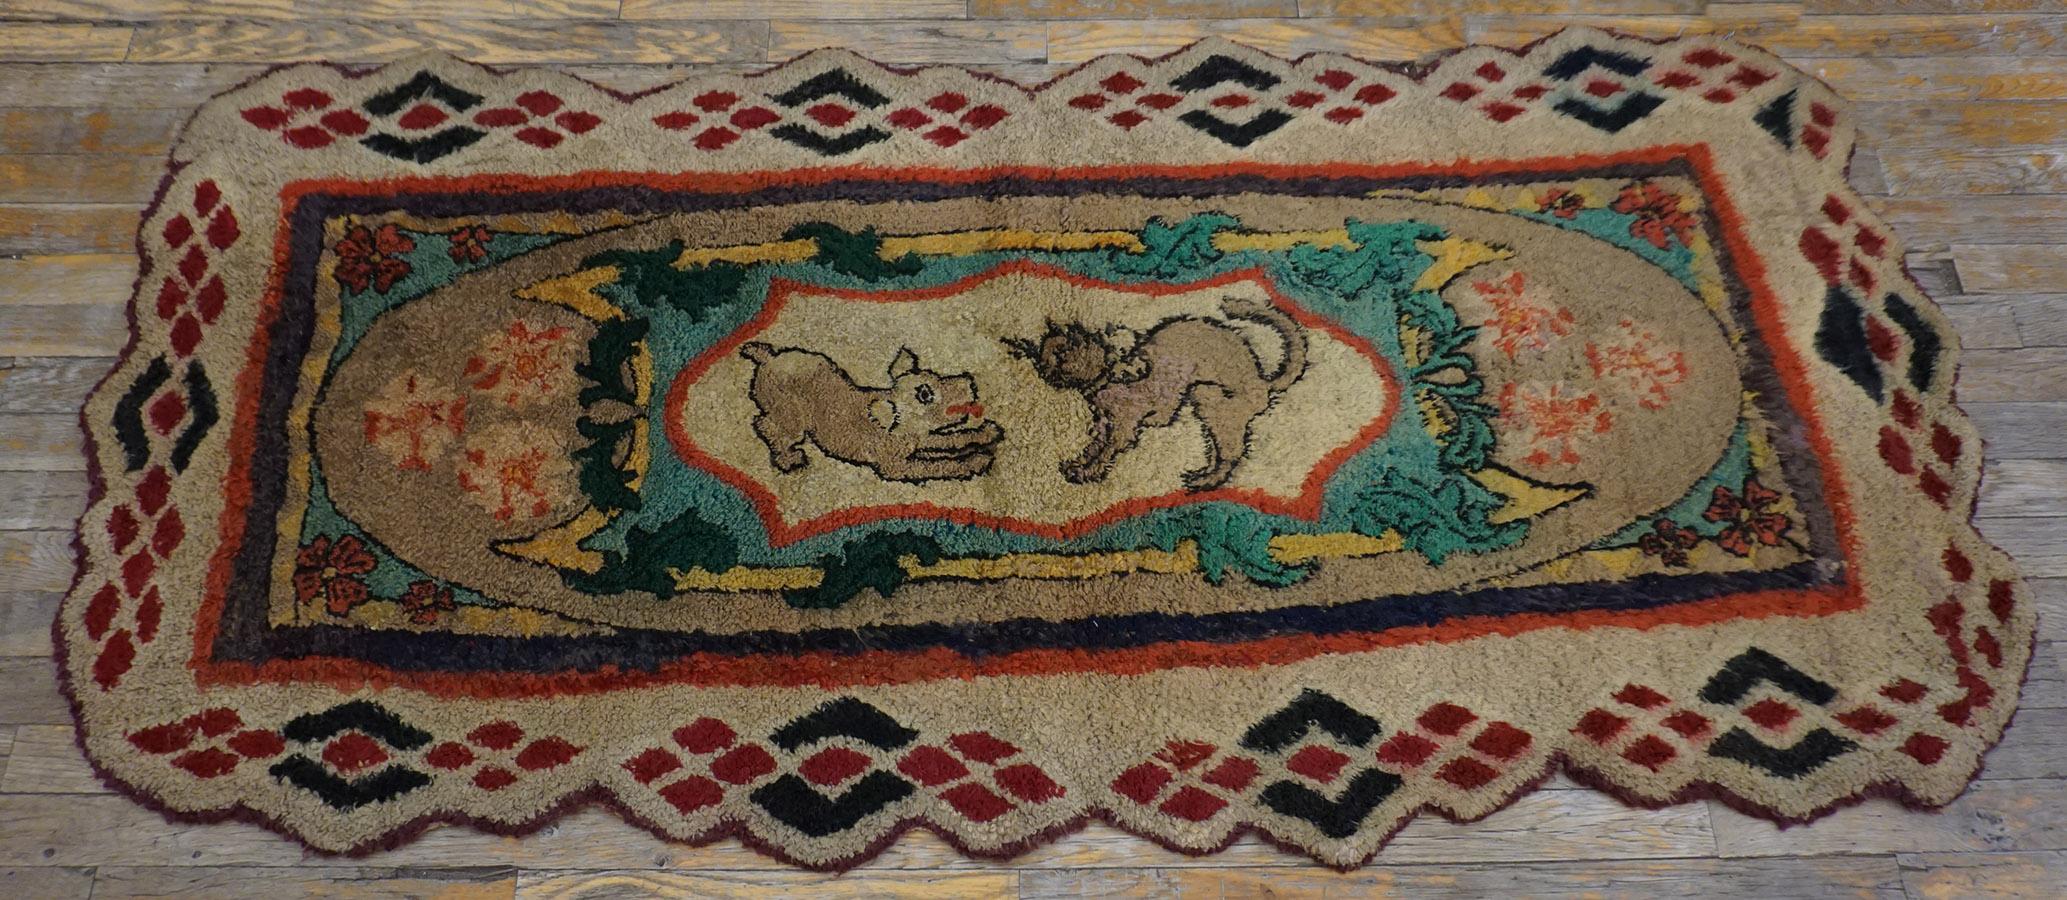 Folk Art Early 20th Century Pictorial American Hooked Rug ( 2'8